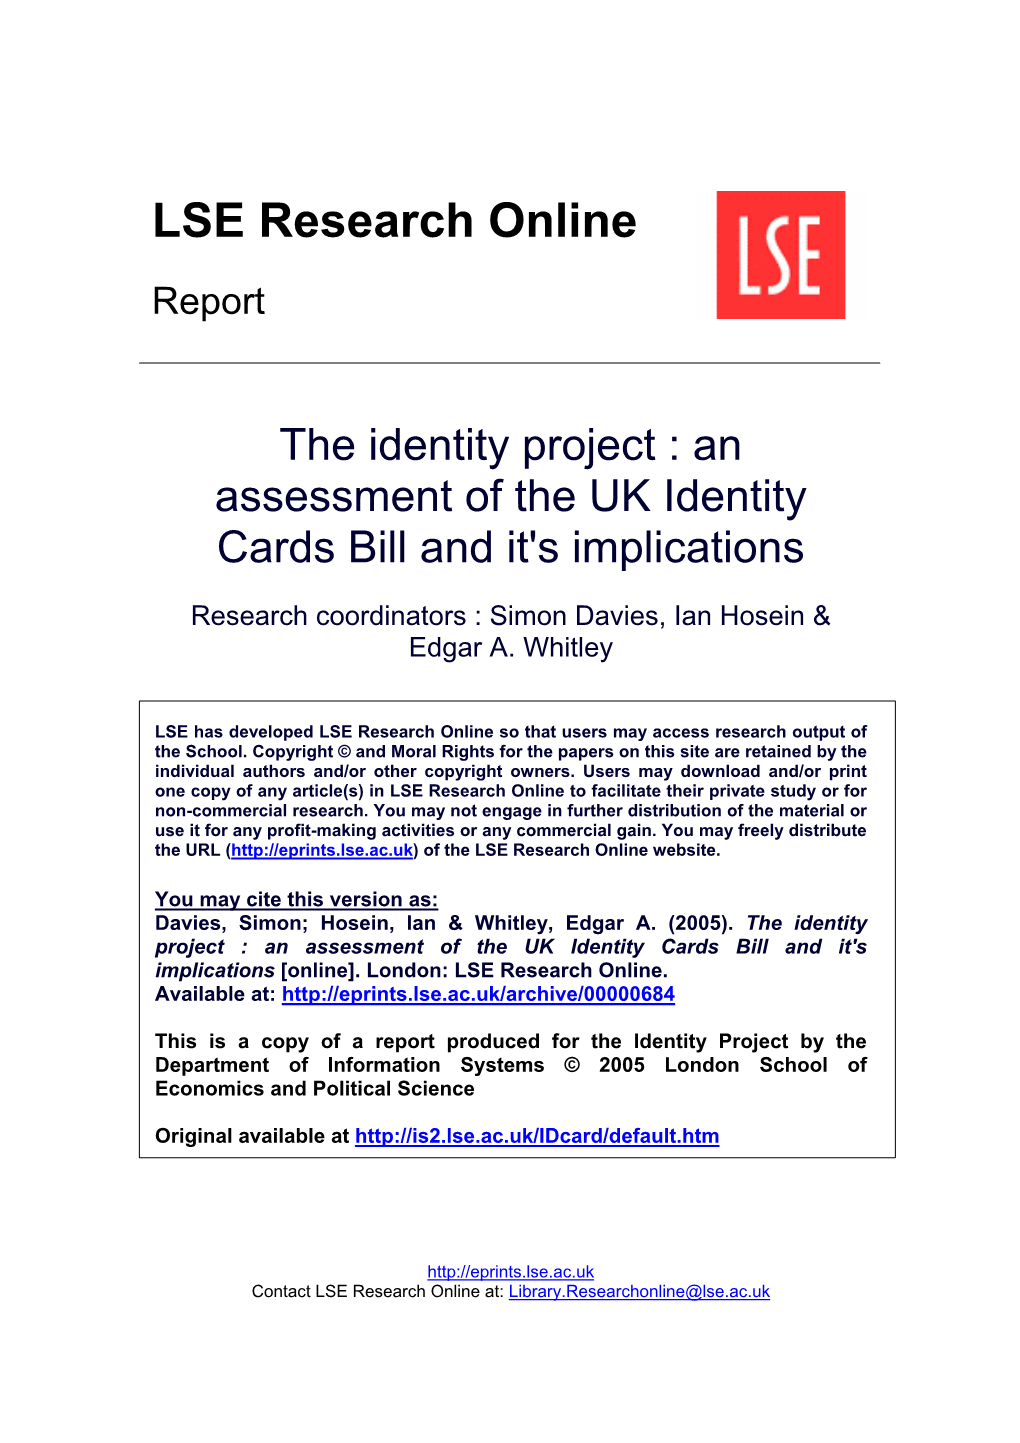 The Identity Project : an Assessment of the UK Identity Cards Bill and It's Implications